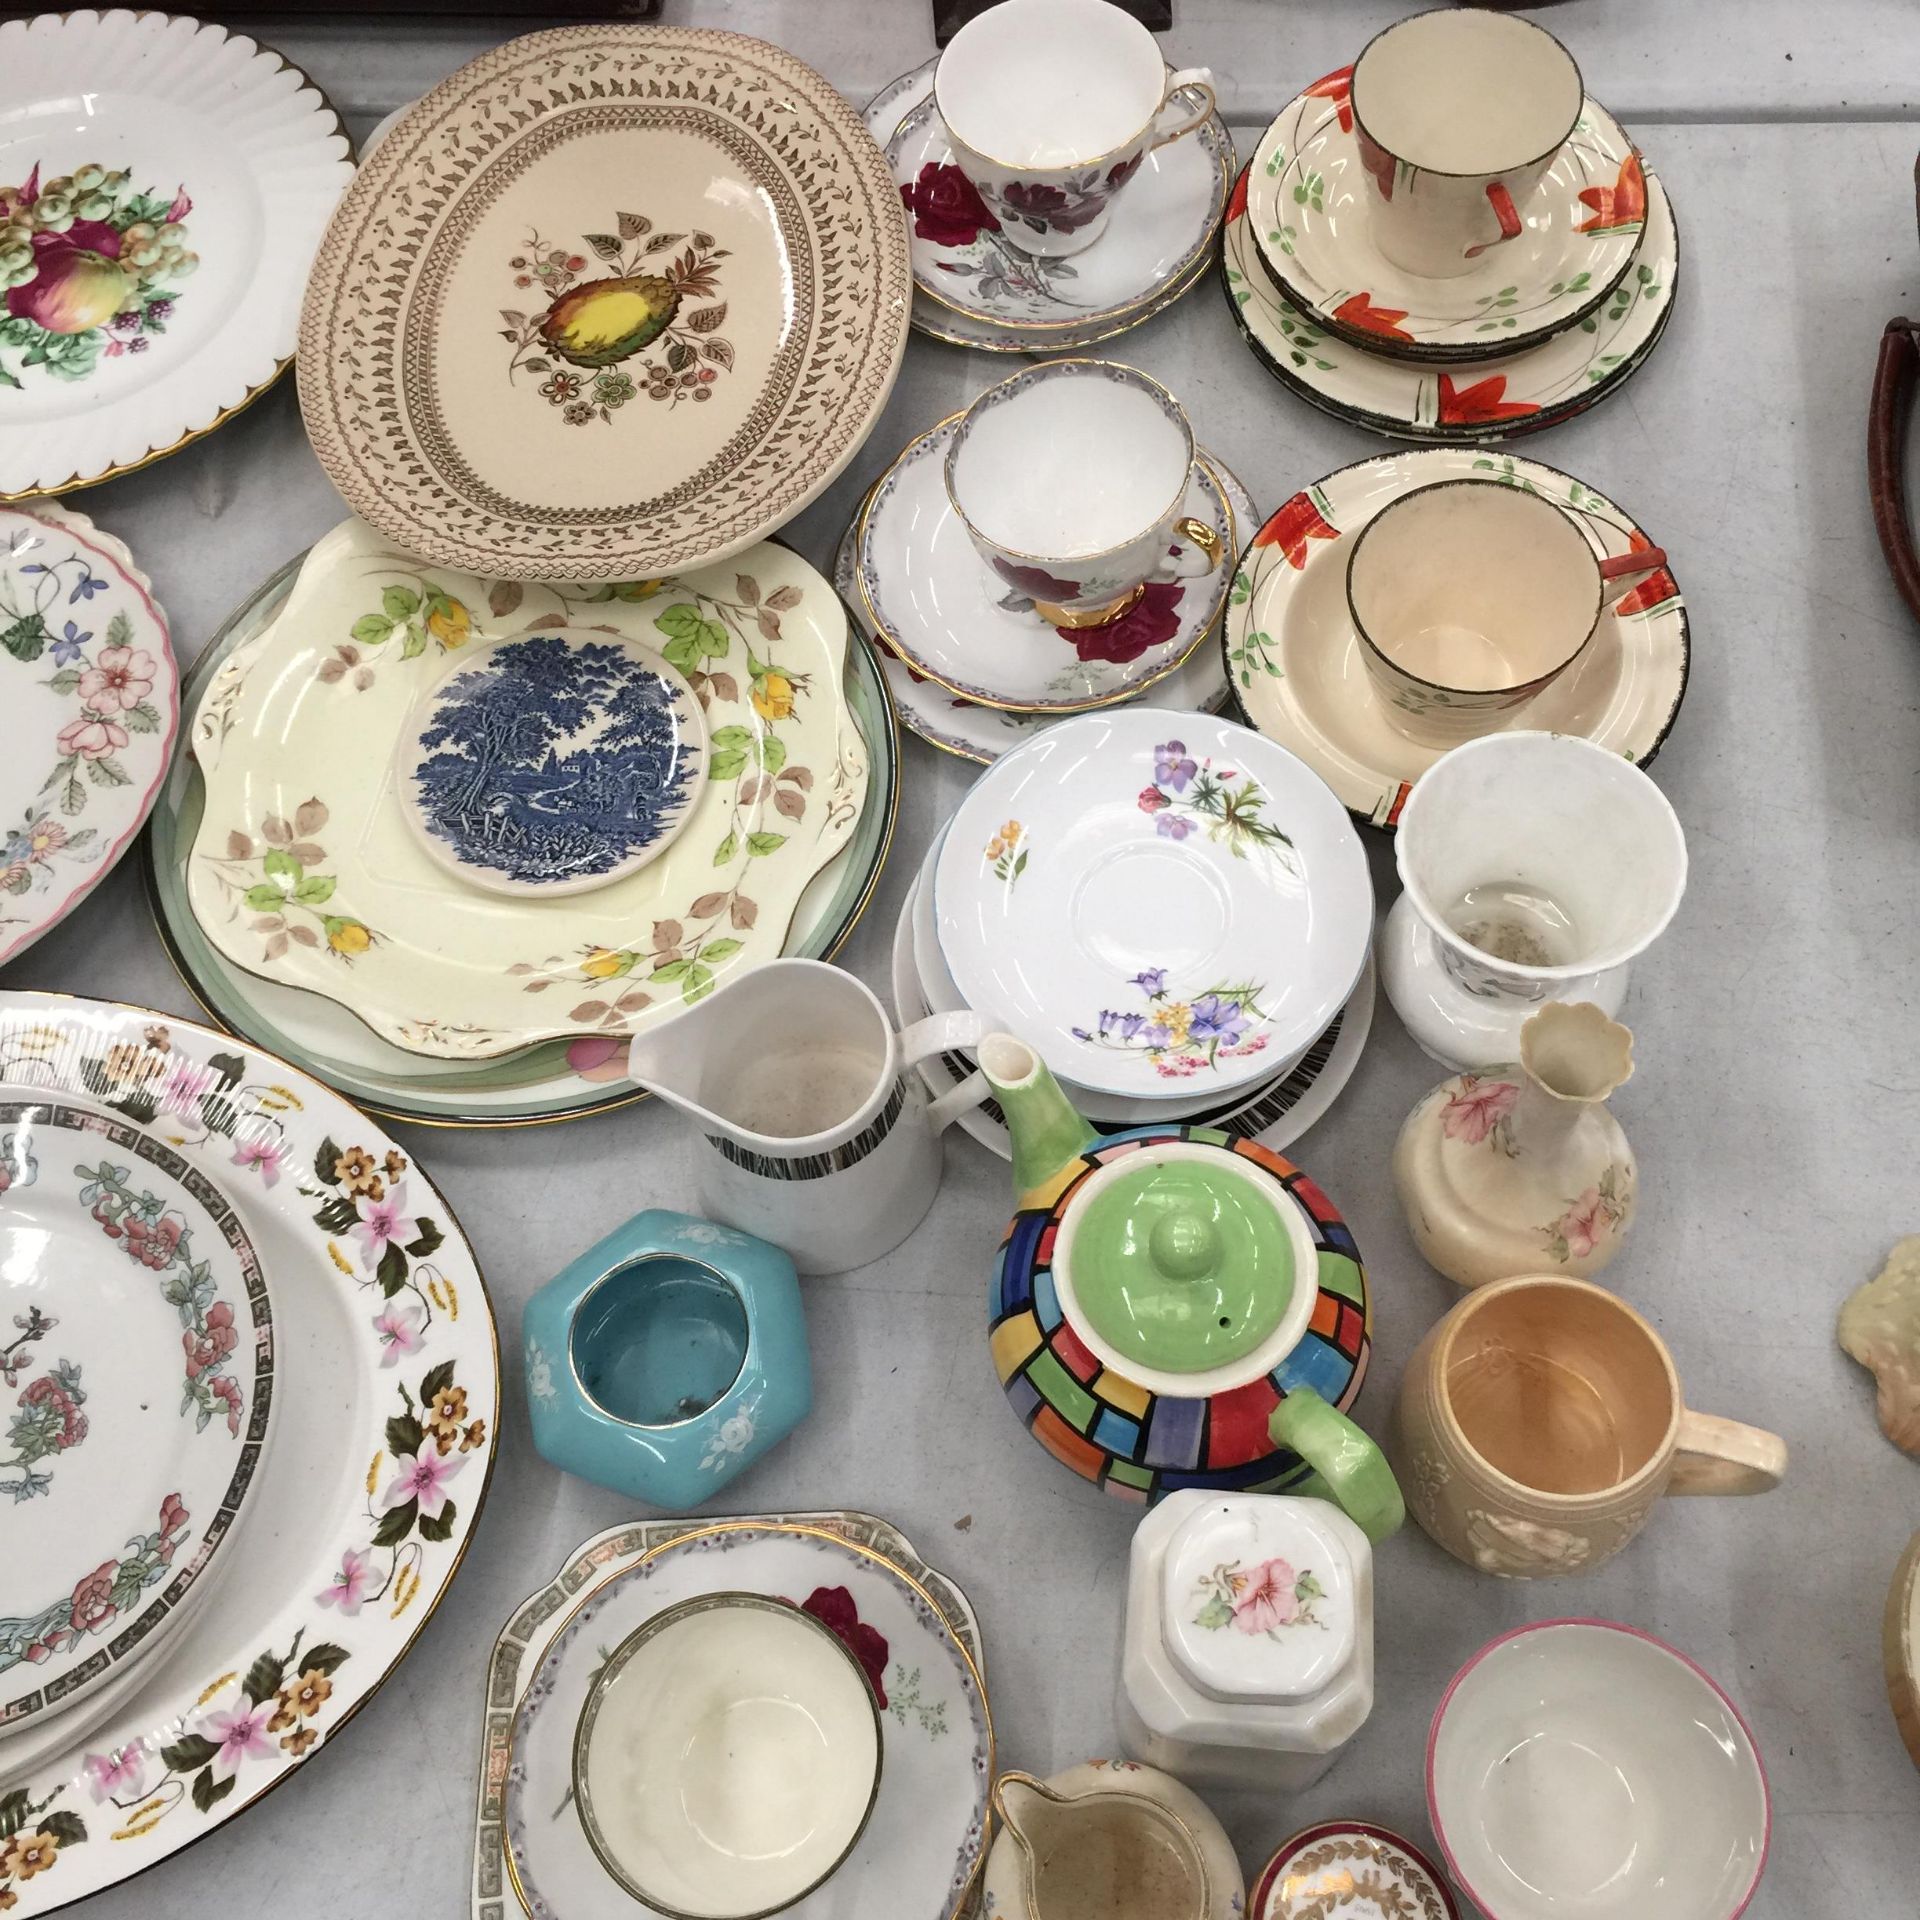 A LARGE QUANTITY OF VINTAGE PLATES, CUPS, SAUCERS, ETC TO INCLUDE ROYAL STAFFORD, SHELLEY SAUCERS, - Bild 3 aus 3